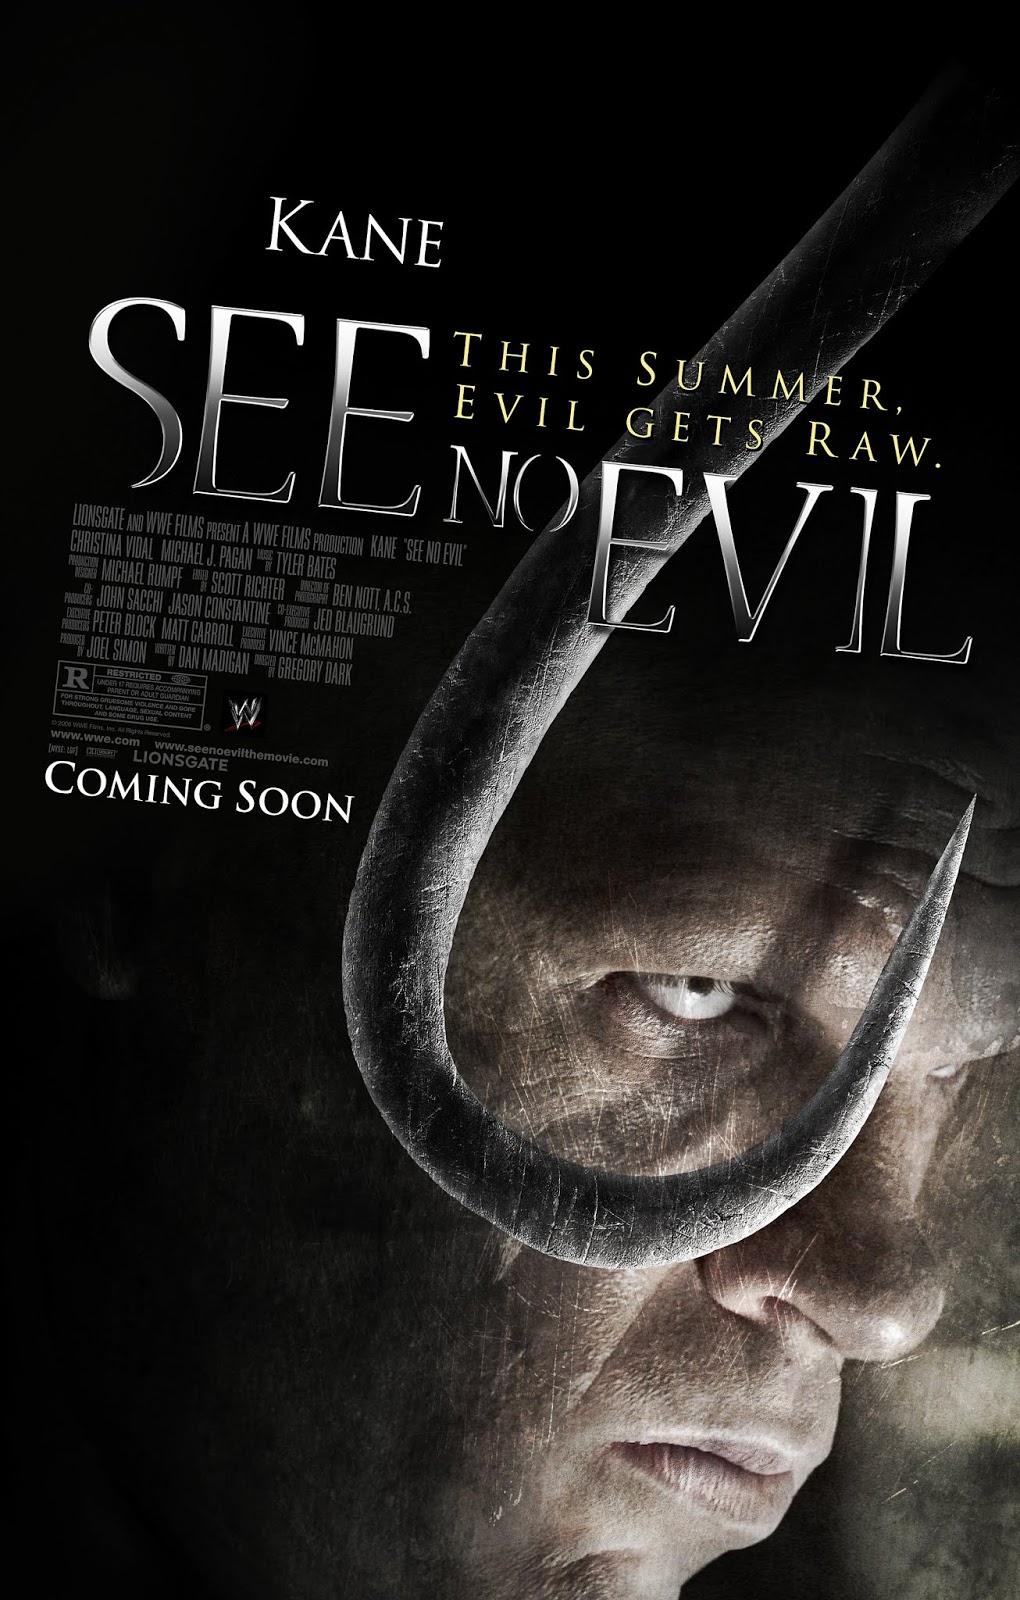 see no evil movie review